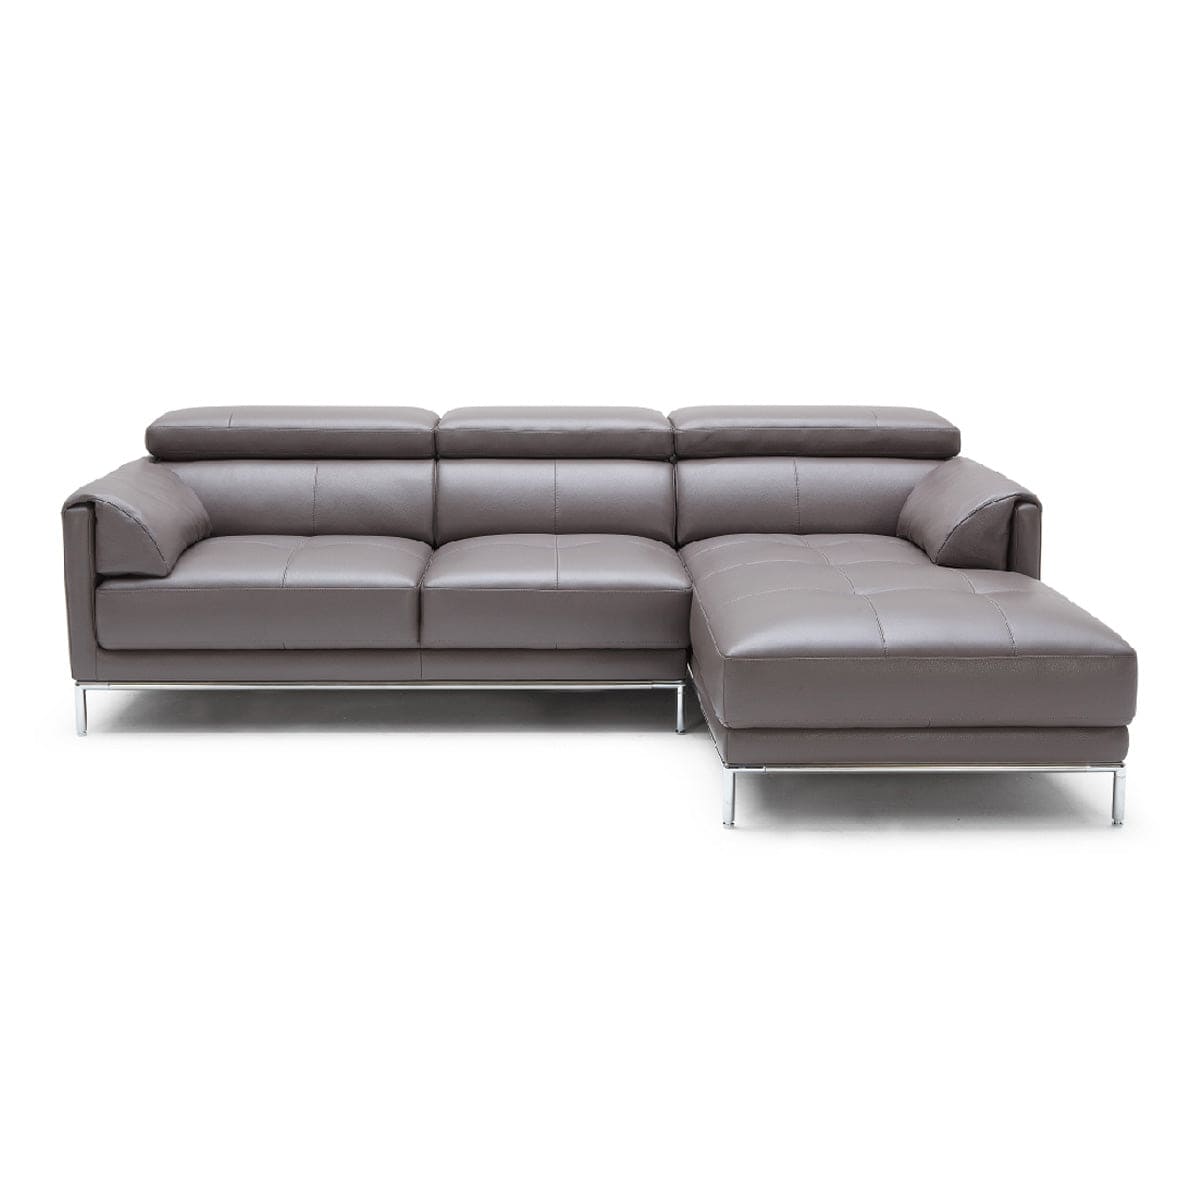 KUKA #1698 Half Leather Sofa (2+CL, Chaise Lounge) (M Series) (I) picket and rail